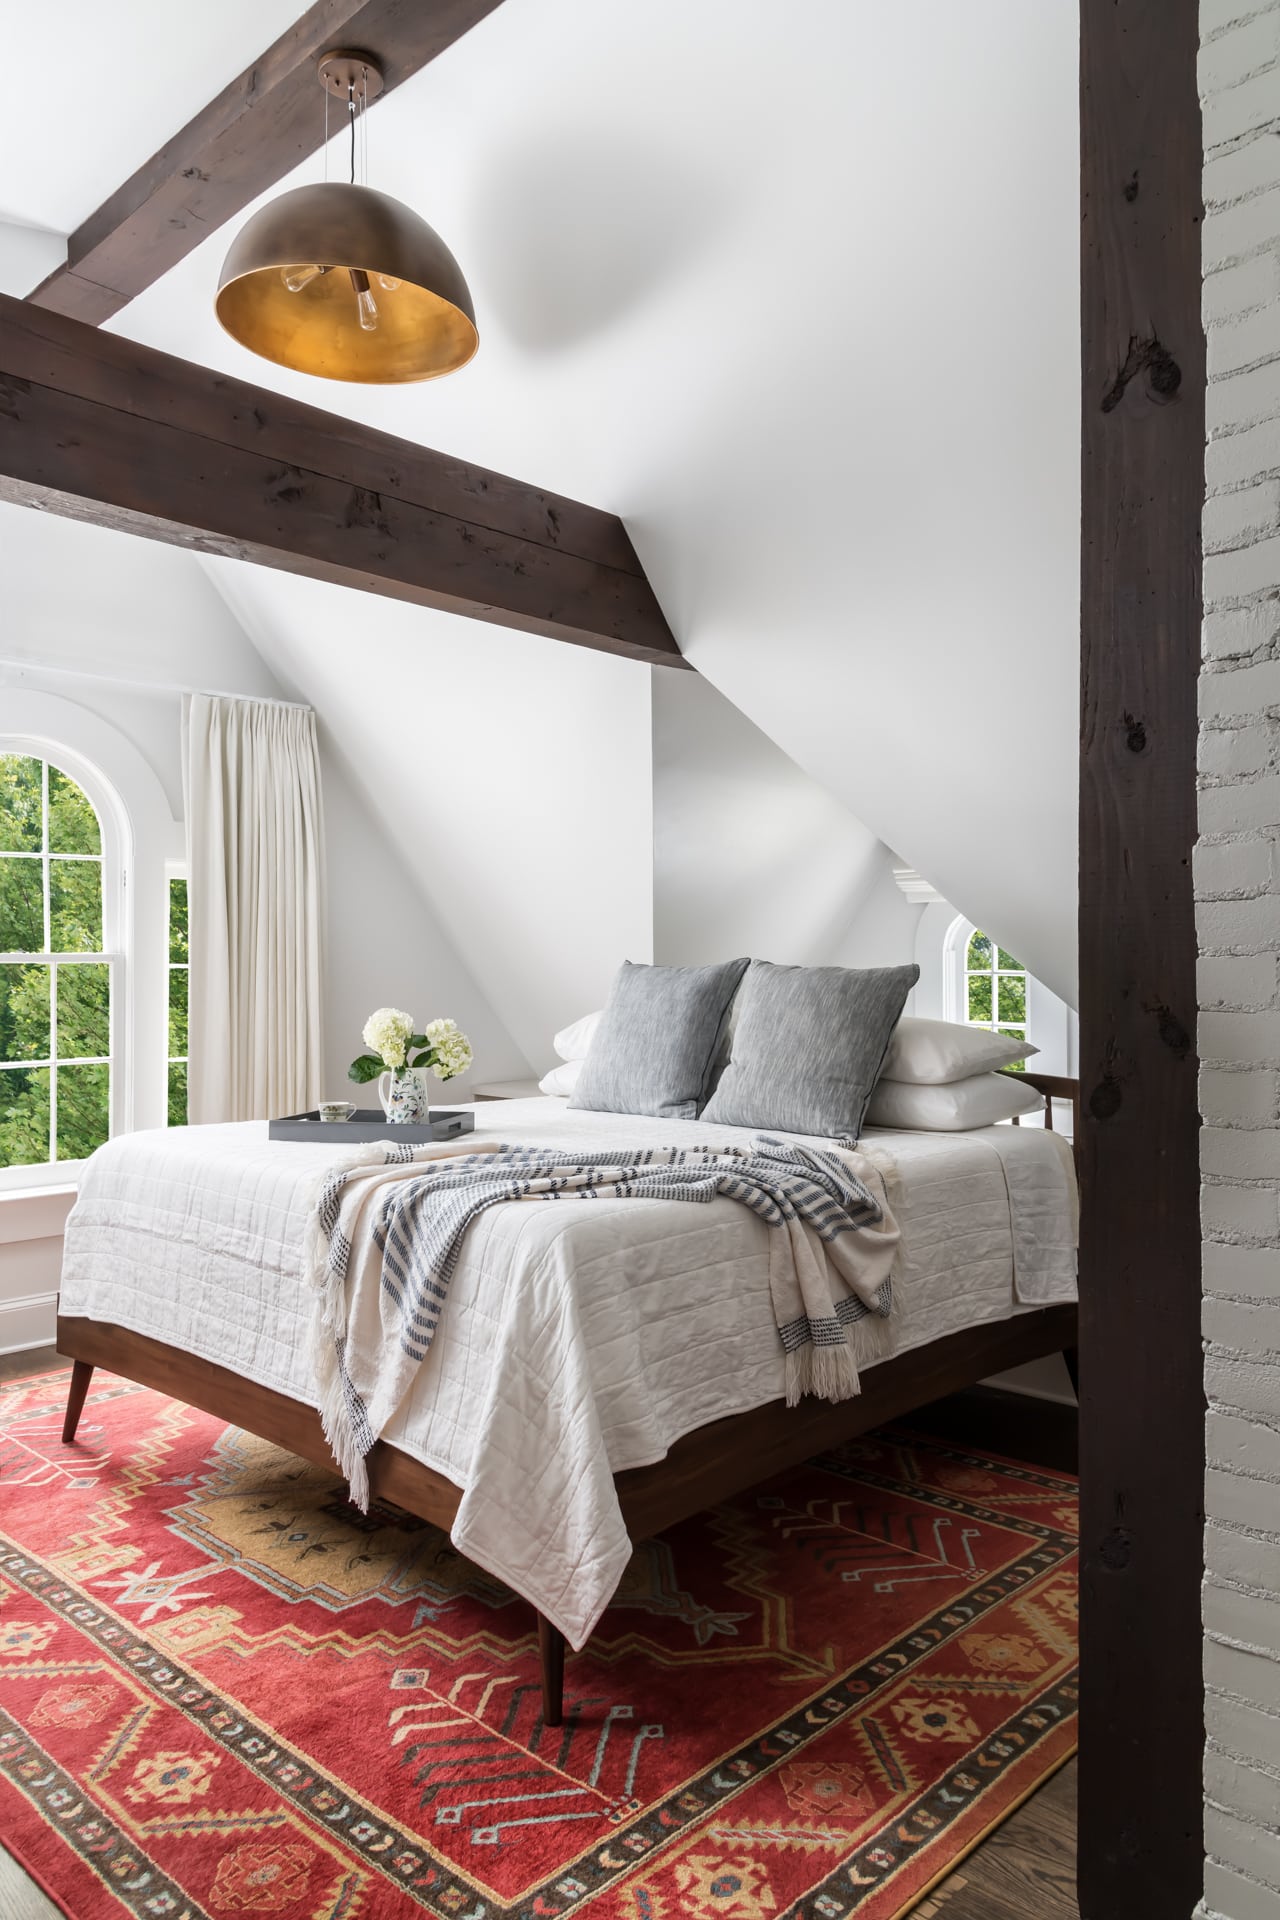 Transitional attic bedroom with natural wood exposed beams, vaulted ceiling, and brass dome pendant light.